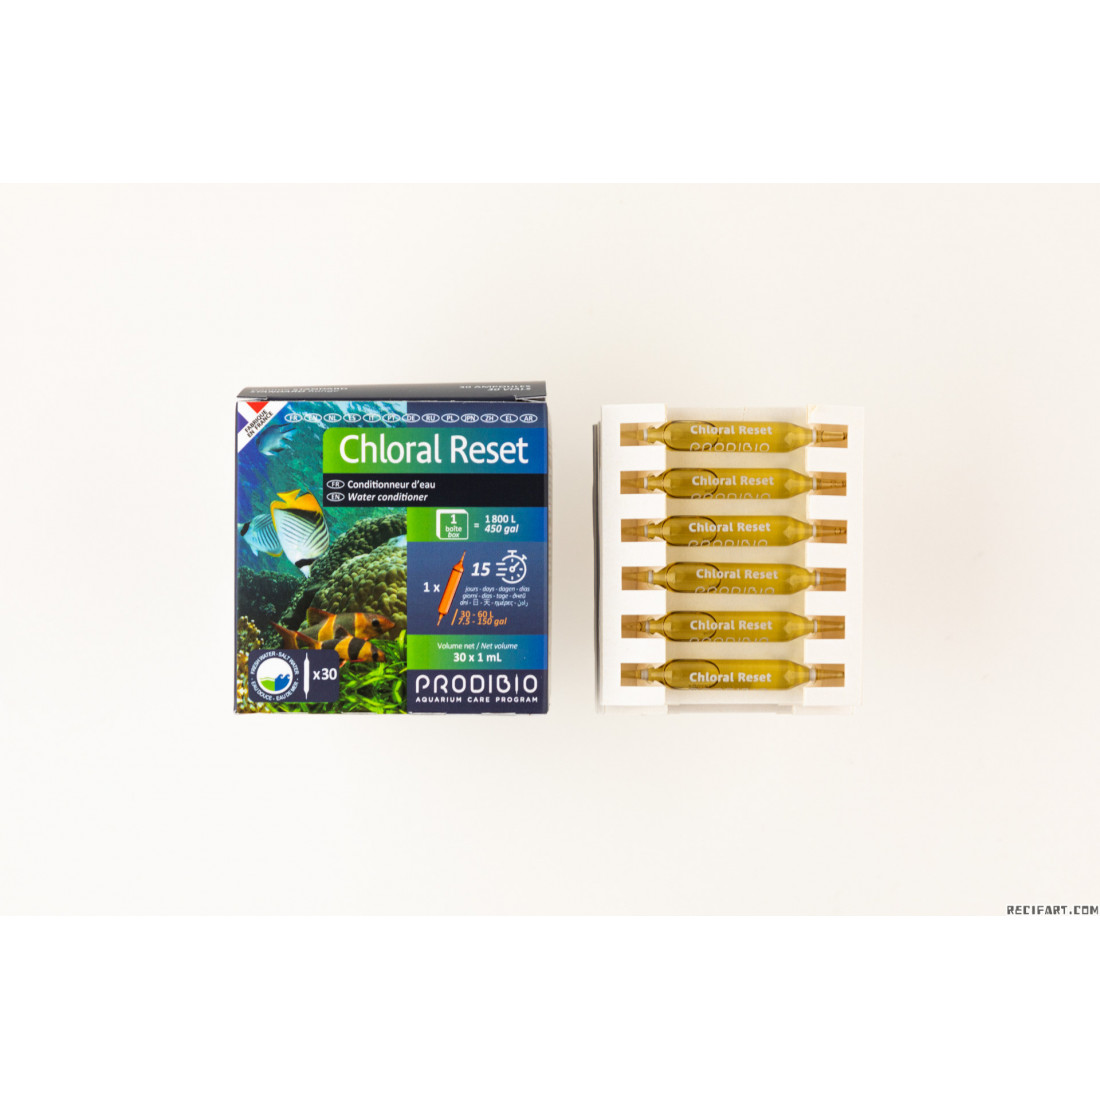 Chloral reset 30 ampoules